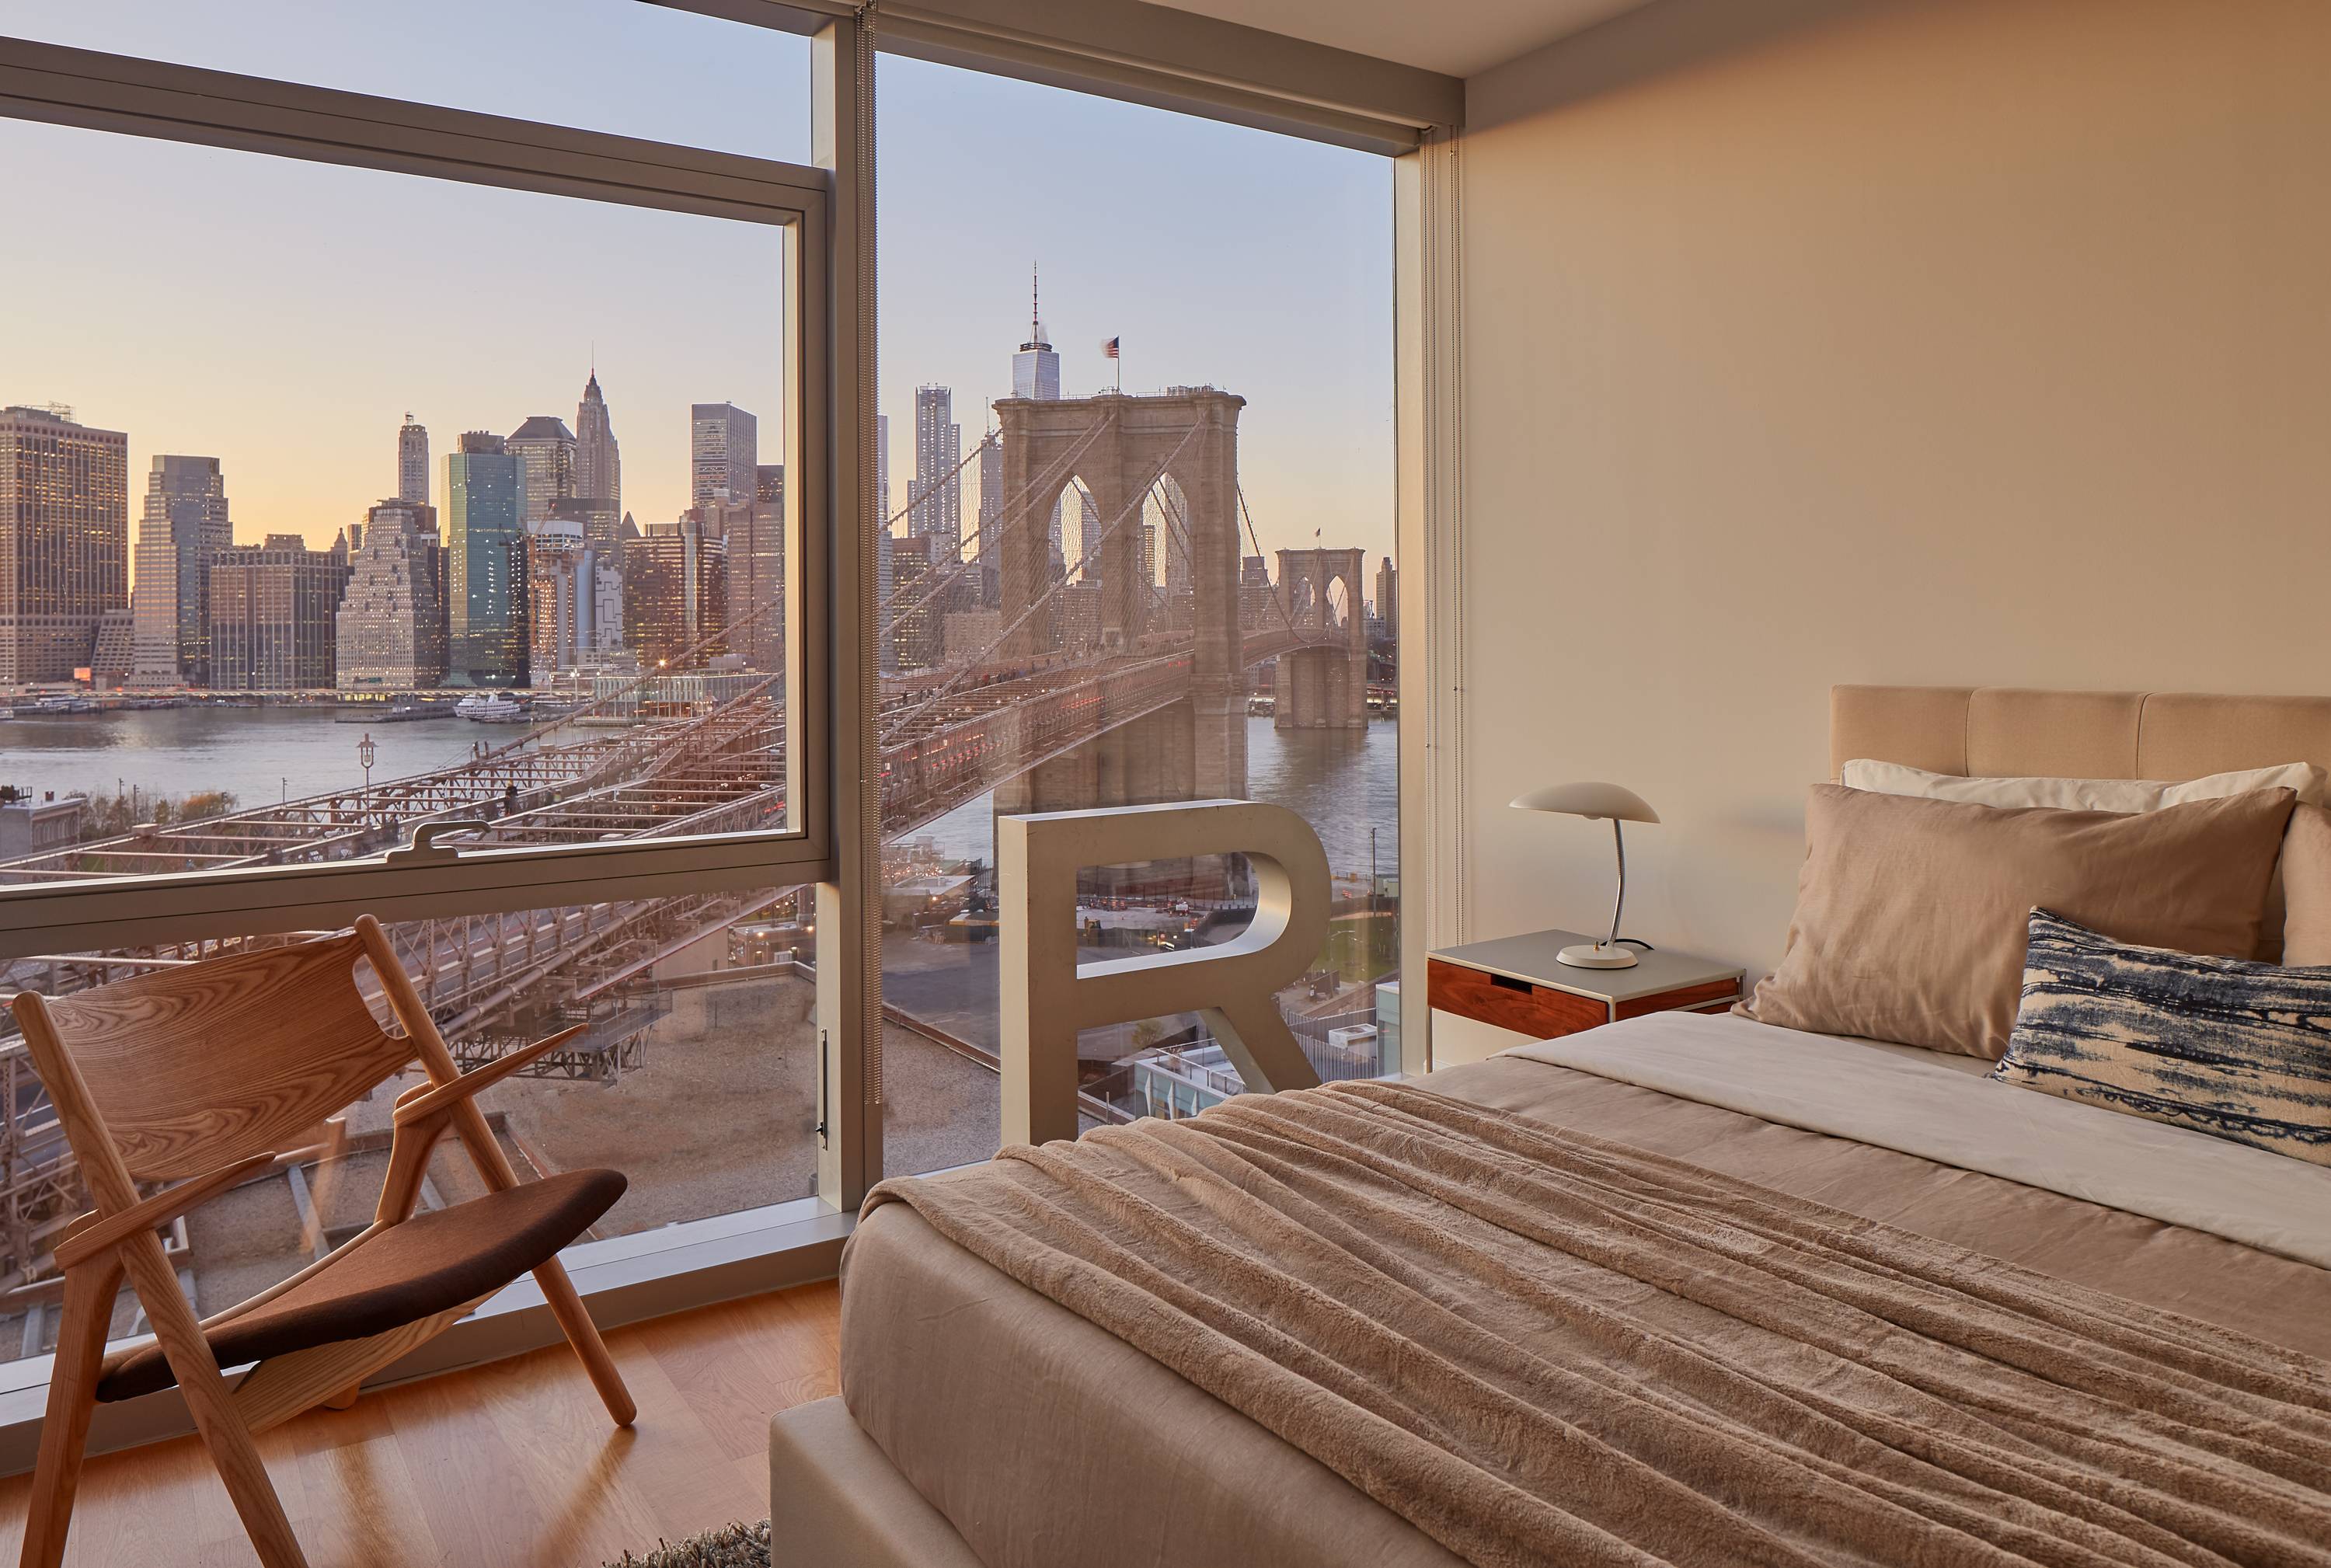 DUMBO 2 BED 2 BATH 1,000 SF SKYLINE AND WATER VIEWS WASHER/DRYER SPLIT BEDS CENTRAL HEAT & A/C PETS ALLOWED